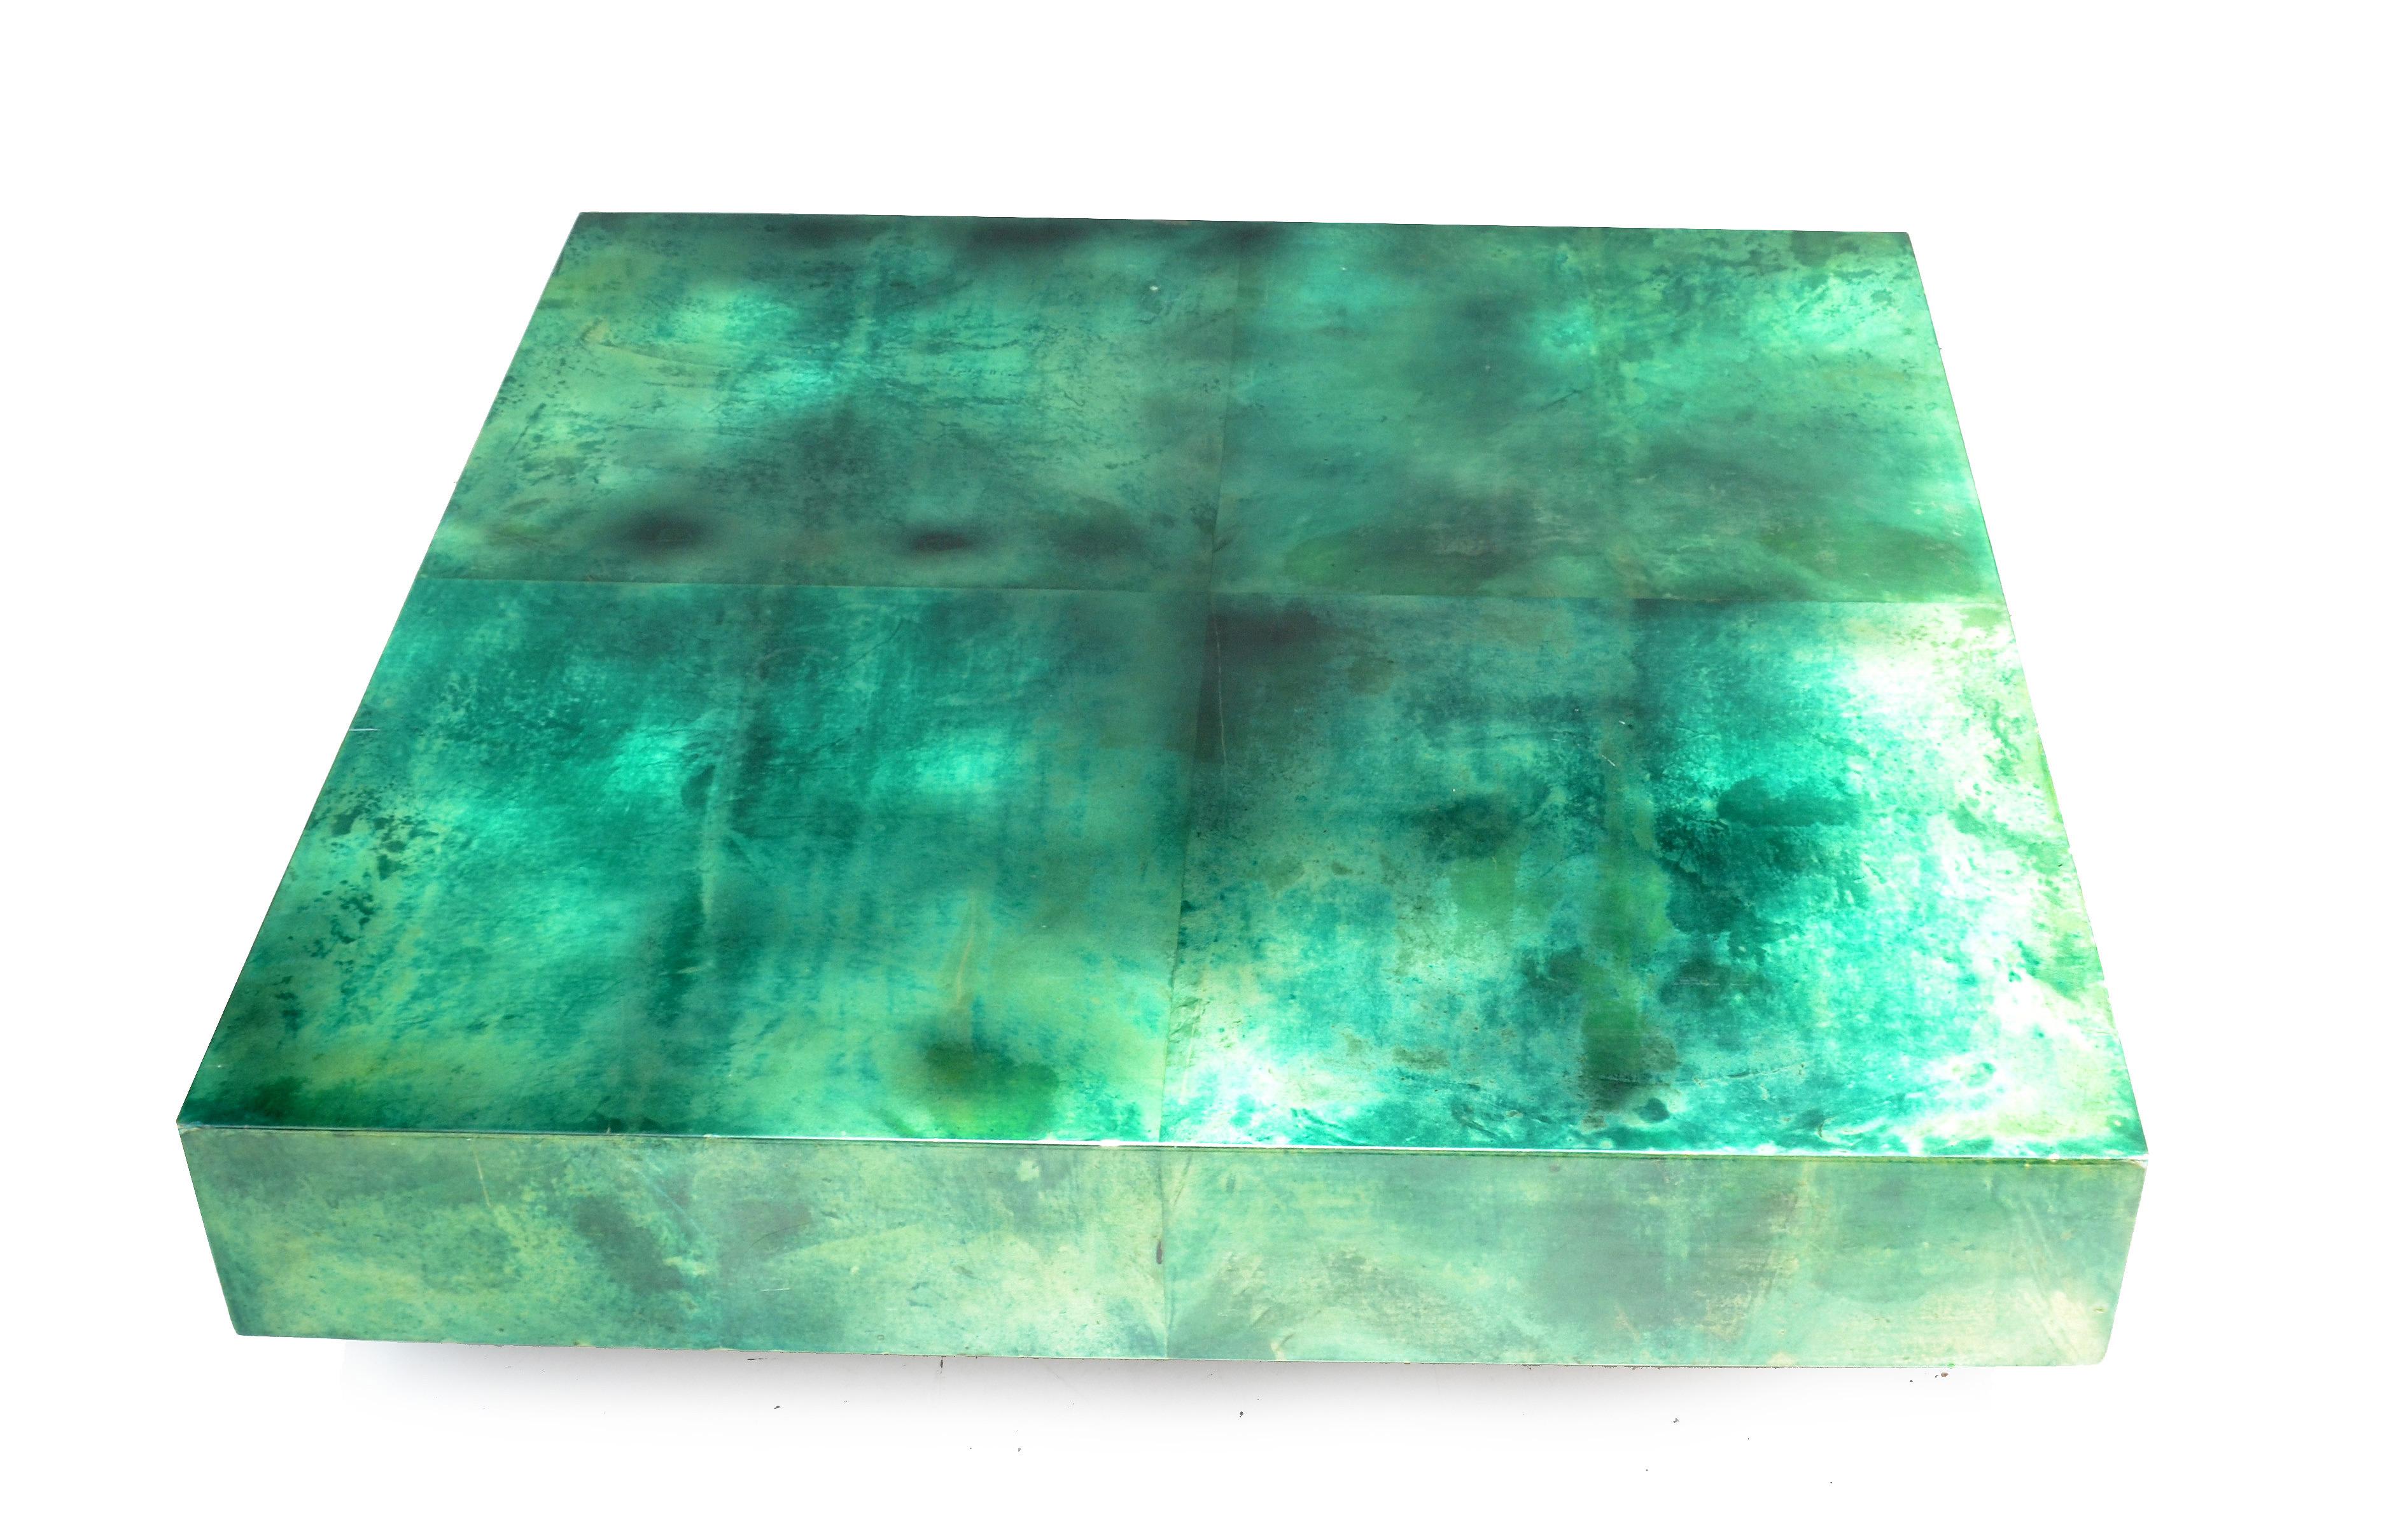 Huge Aldo Tura Coffee / Cocktail Table Emerald Green Lacquered Goatskin Top  1